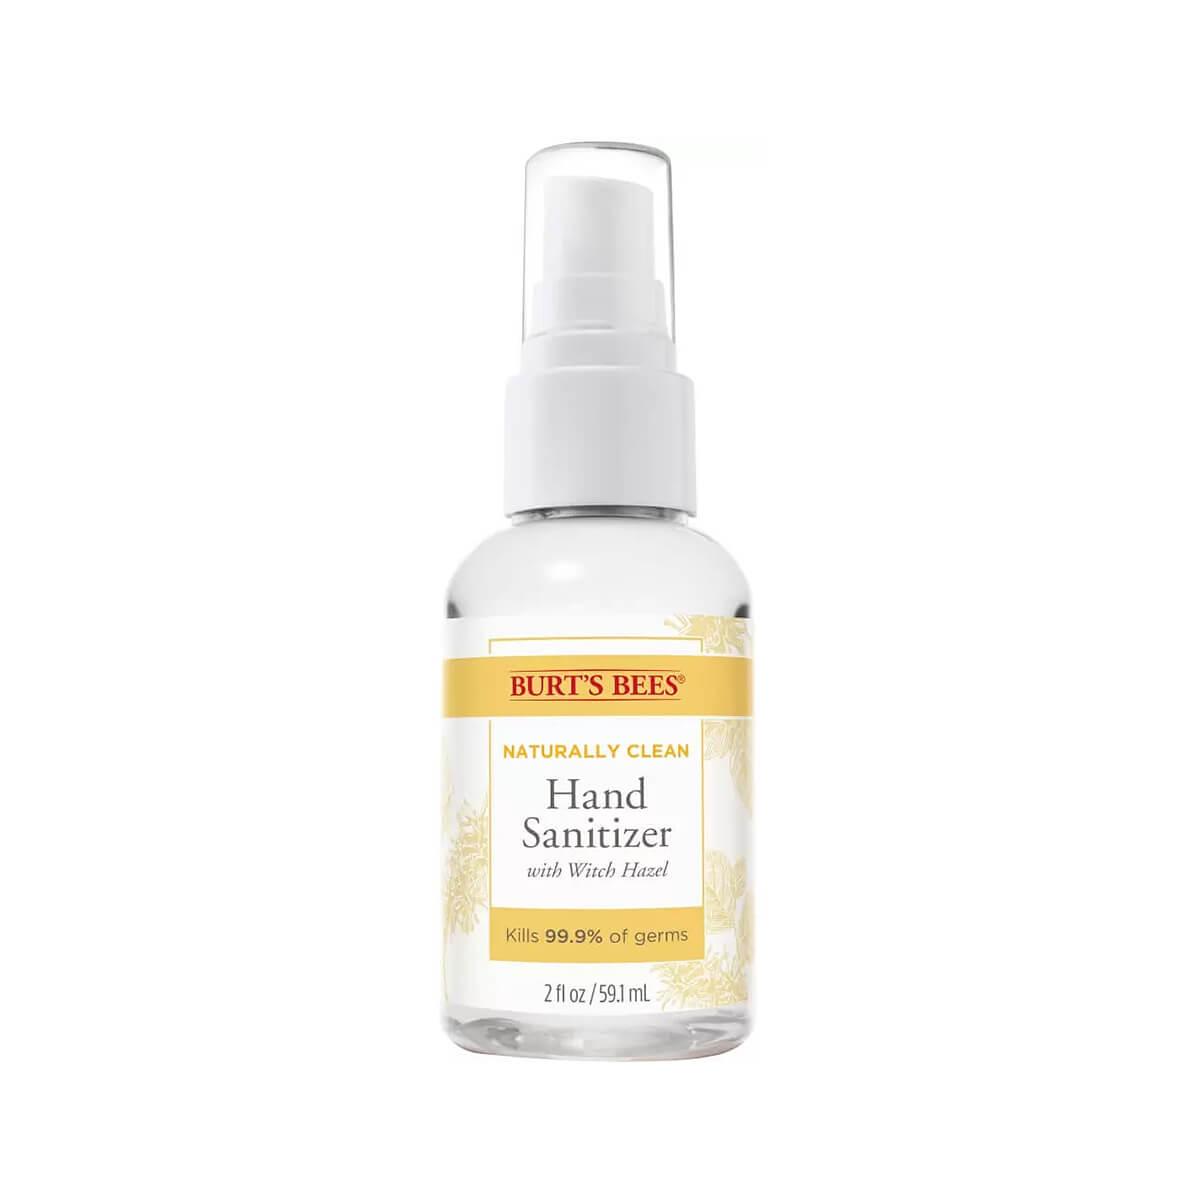  Naturally Clean Hand Sanitizer